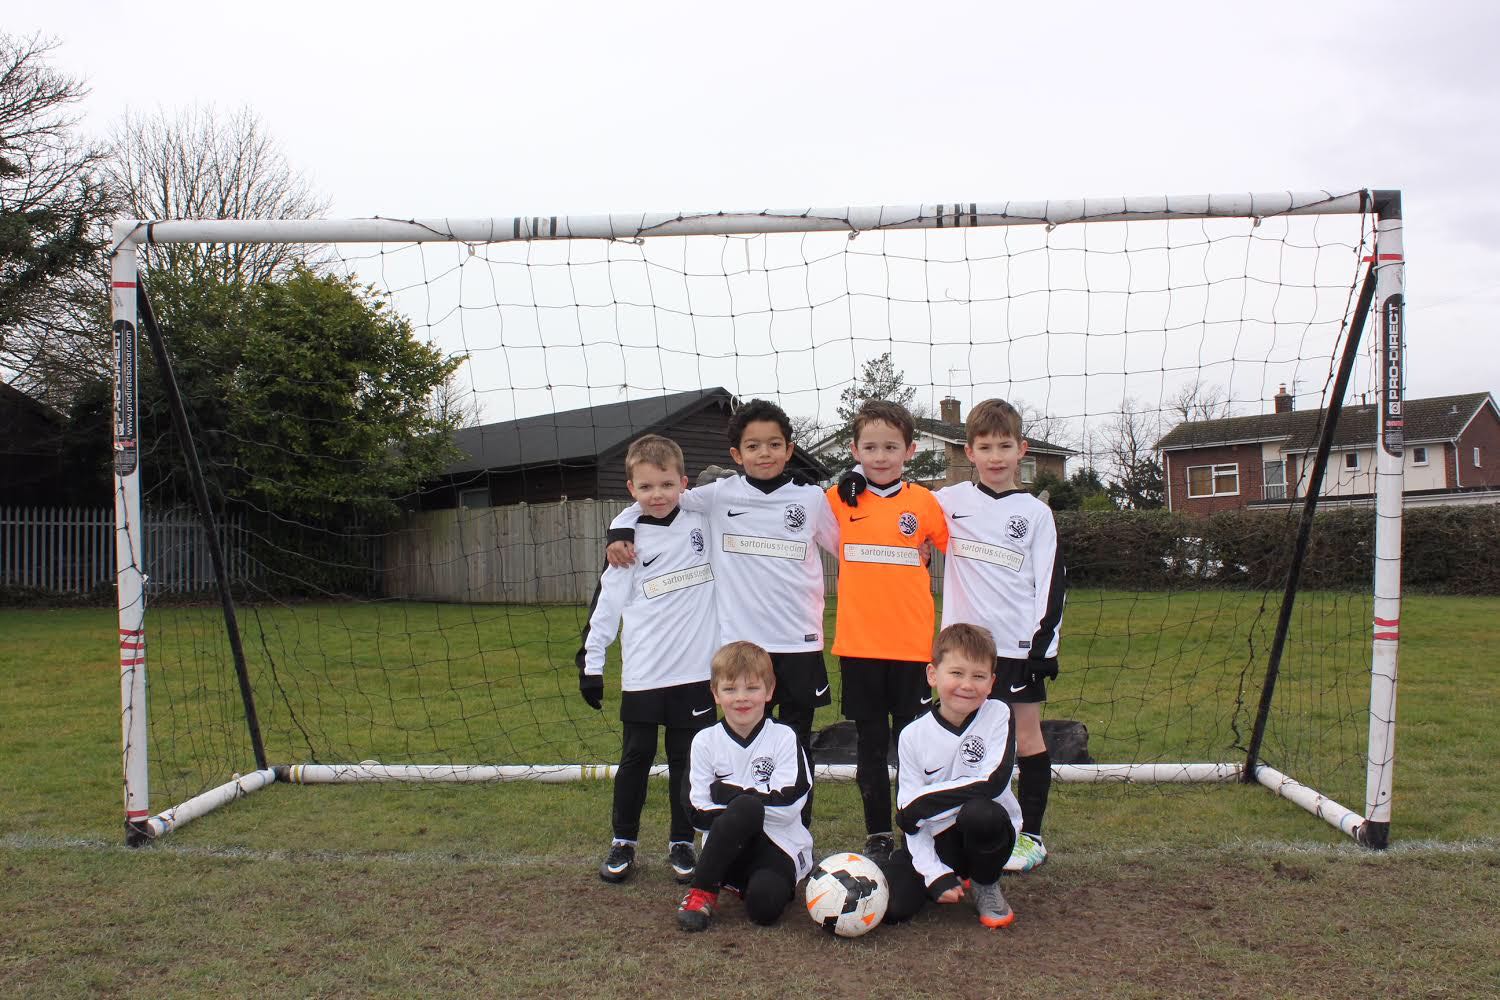 The under 7 Eagles